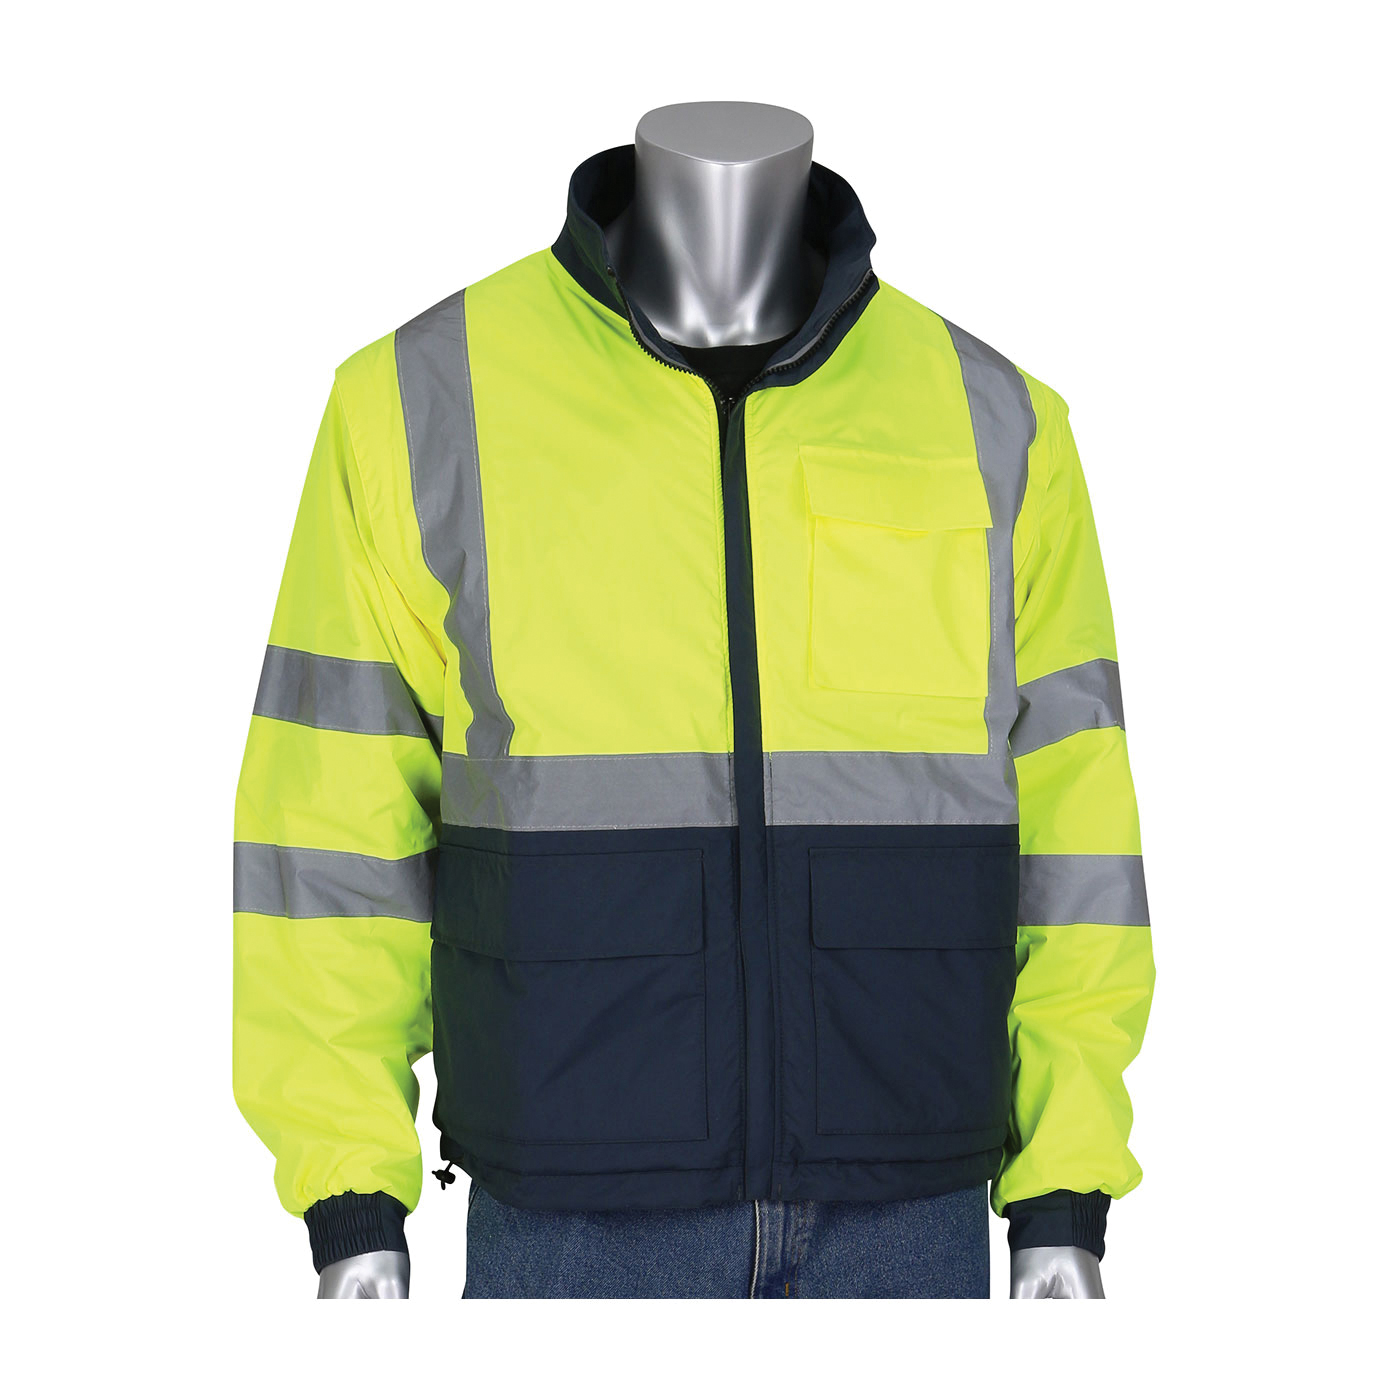 PIP® 333-1500-R/3X 333-1500-R 4-in-1 Multi-Seasonal Lightweight Reversible Windbreaker Jacket With Detachable Sleeves, Dark Gray/Hi-Viz Lime Yellow, Polyester, 58.3 in Chest, Resists: Water, ANSI 107 Type R Class 3